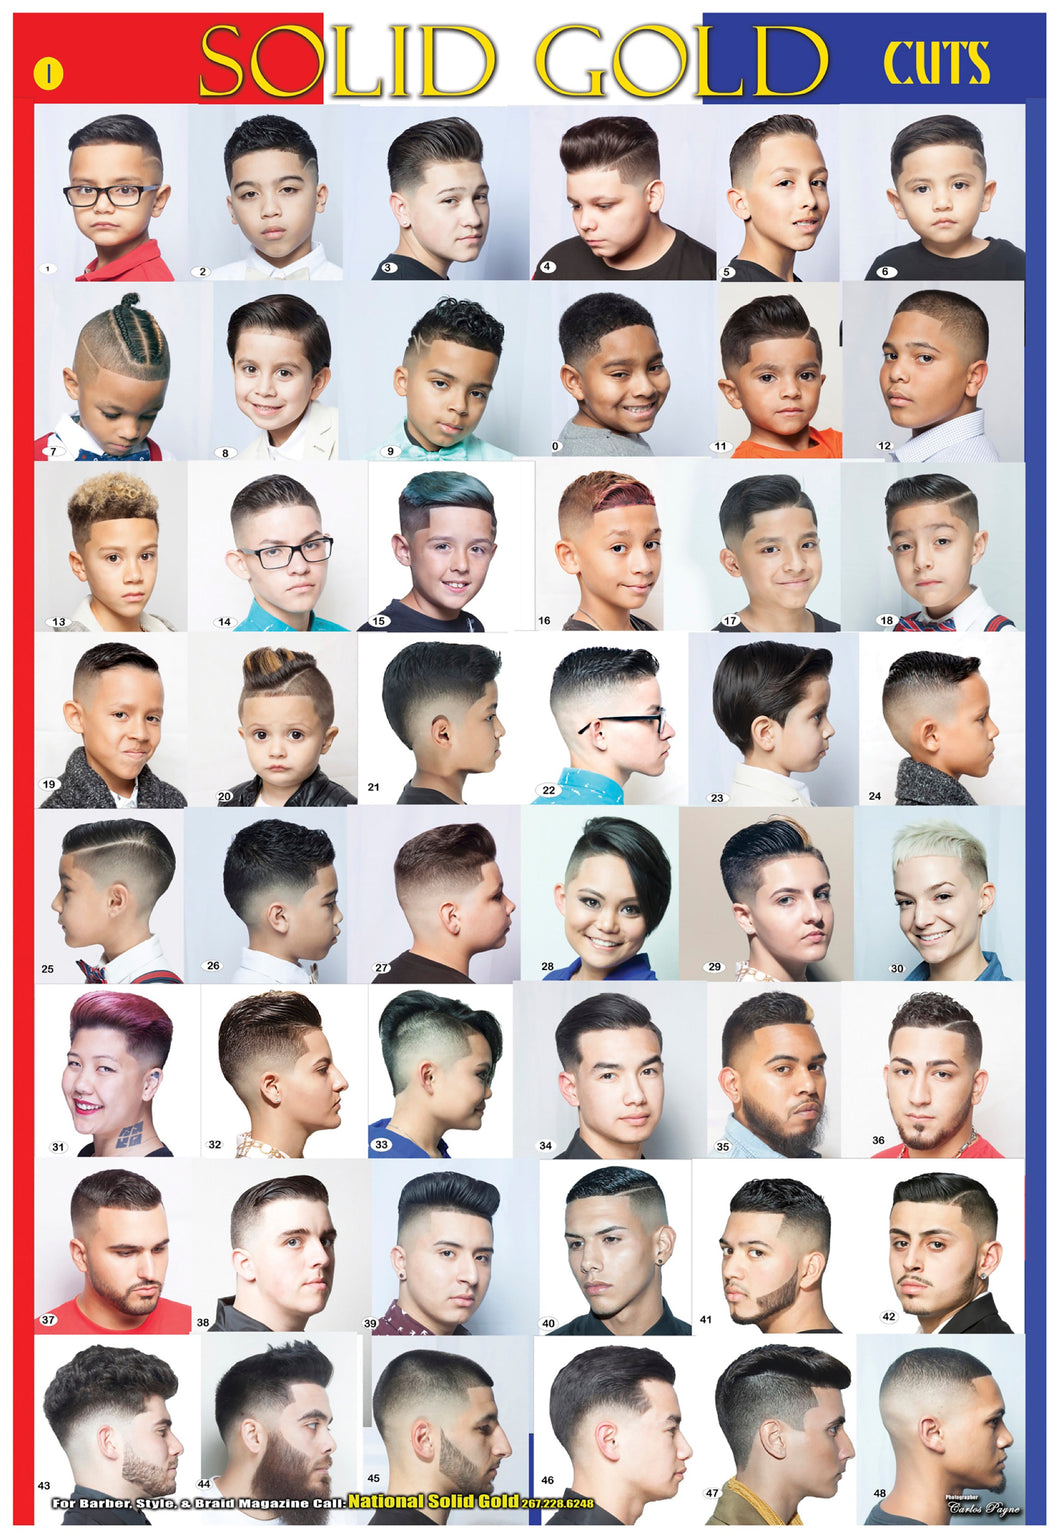 Barber posters I